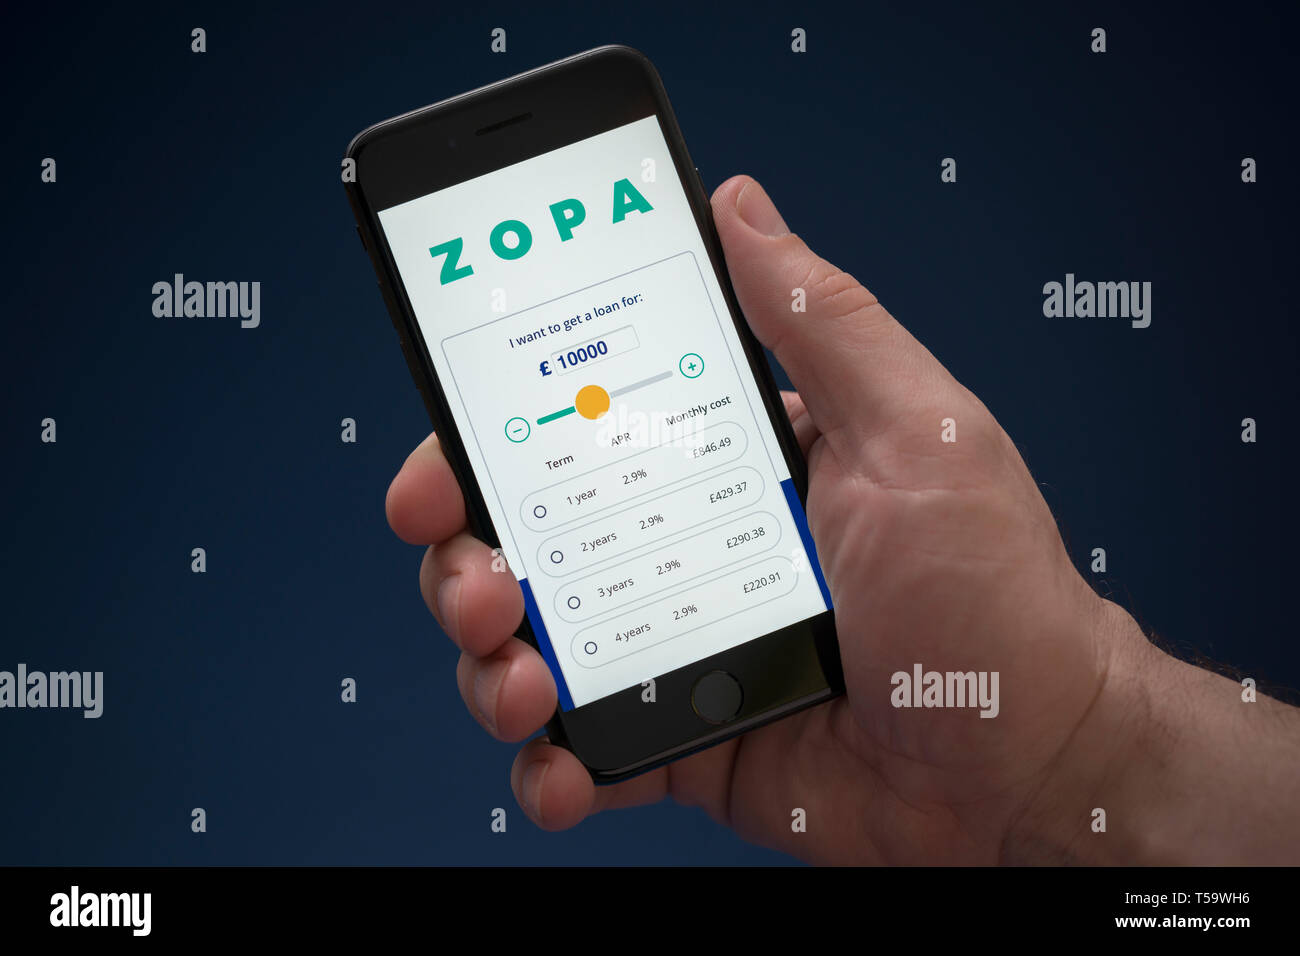 A man looks at his iPhone which displays the Zopa logo (Editorial use only). Stock Photo